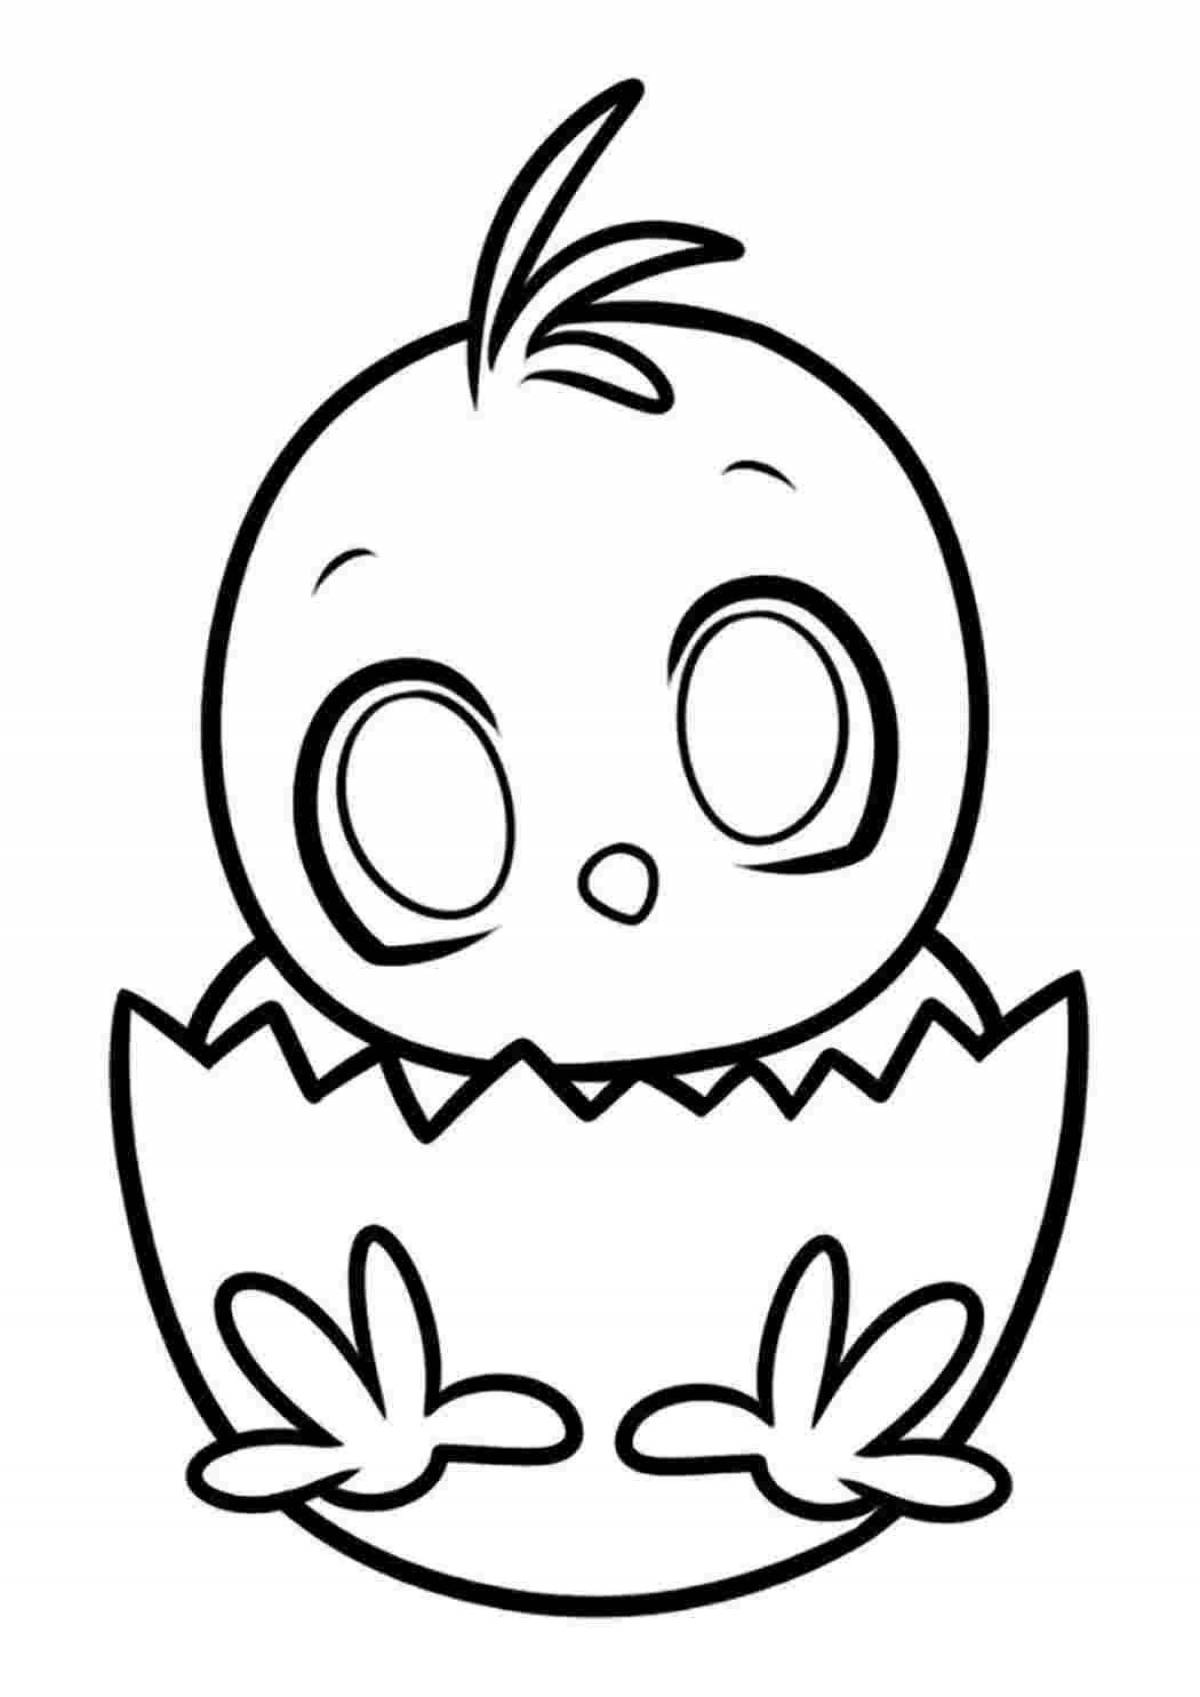 Chicken in shell coloring book